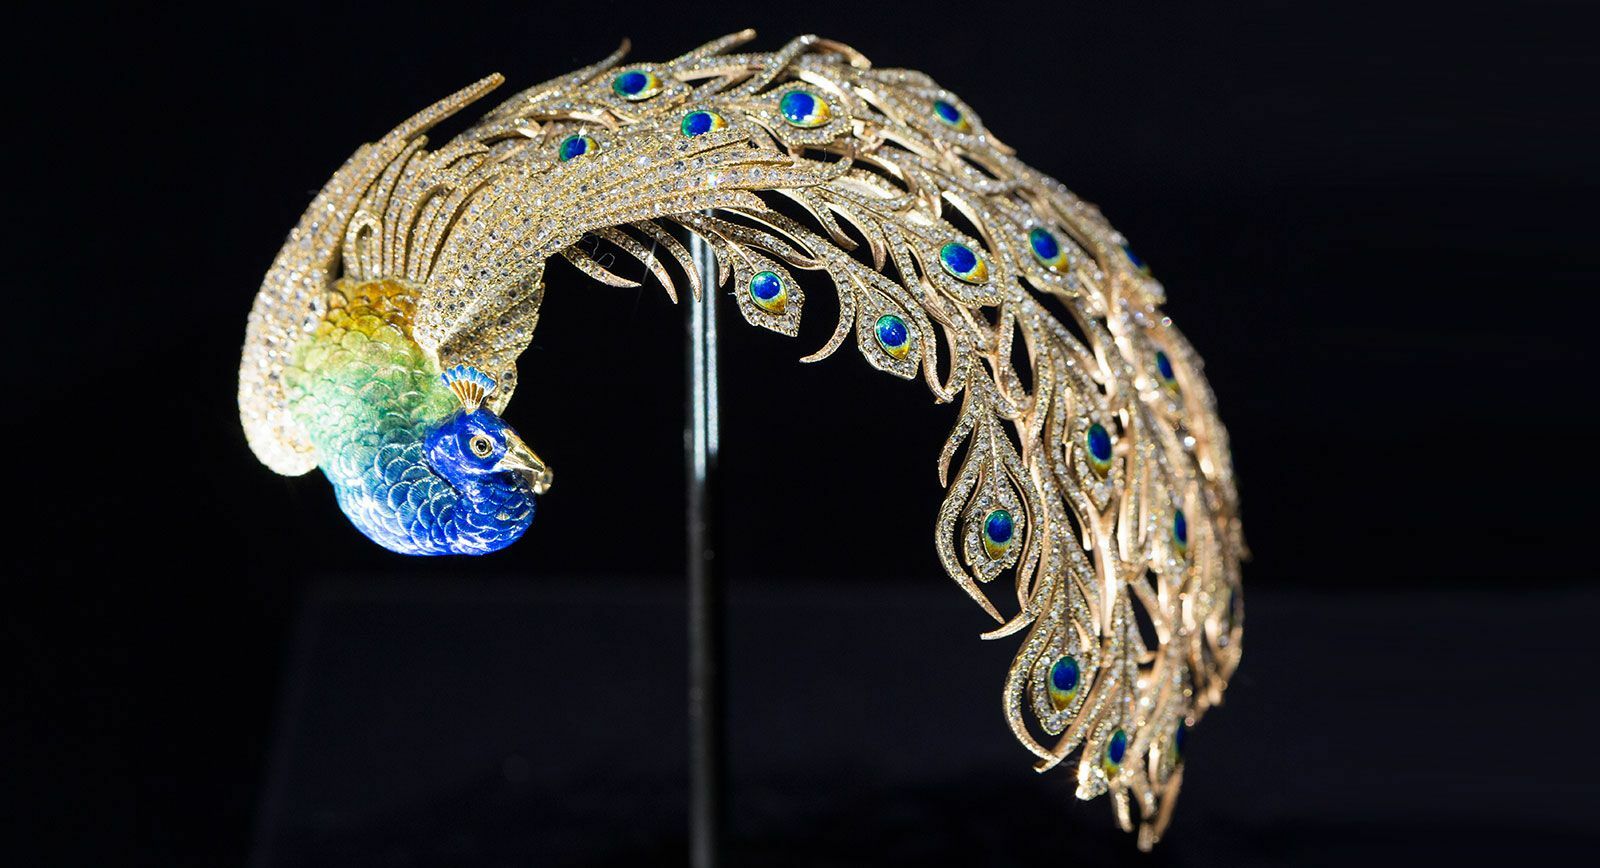 Bejewelled Treasures: The Al Thani Collection – a Must-See Exhibition